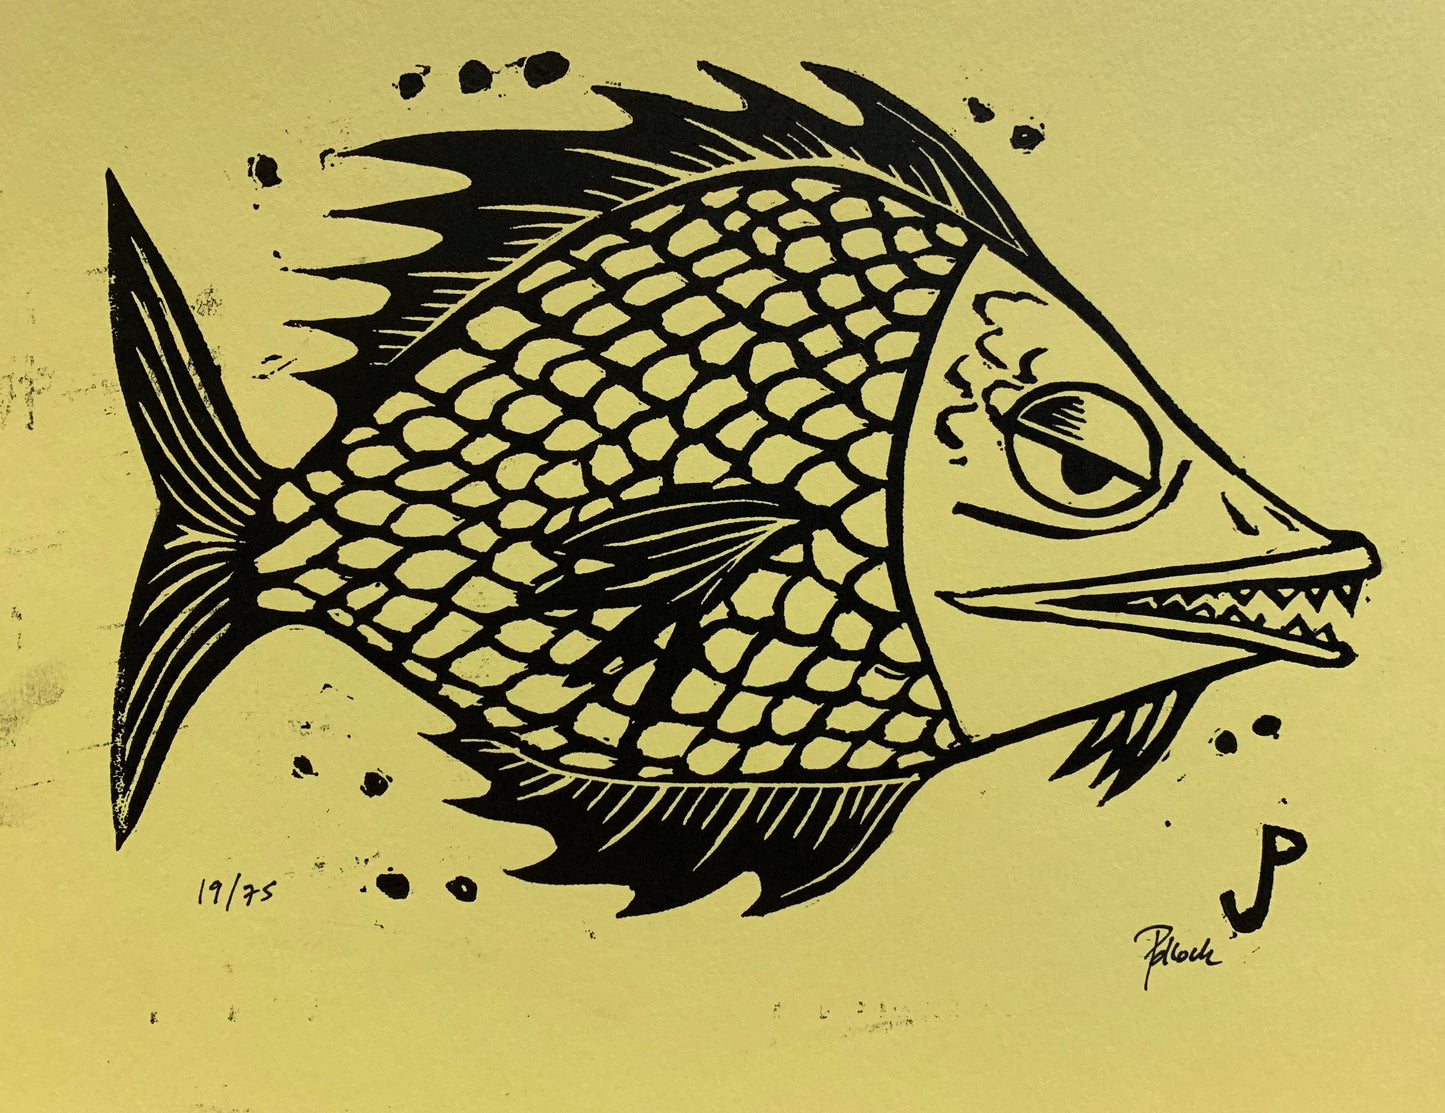 Jim Pollock "Fish" (Yellow Colorway) - LOTTERY ENTRY ONLY